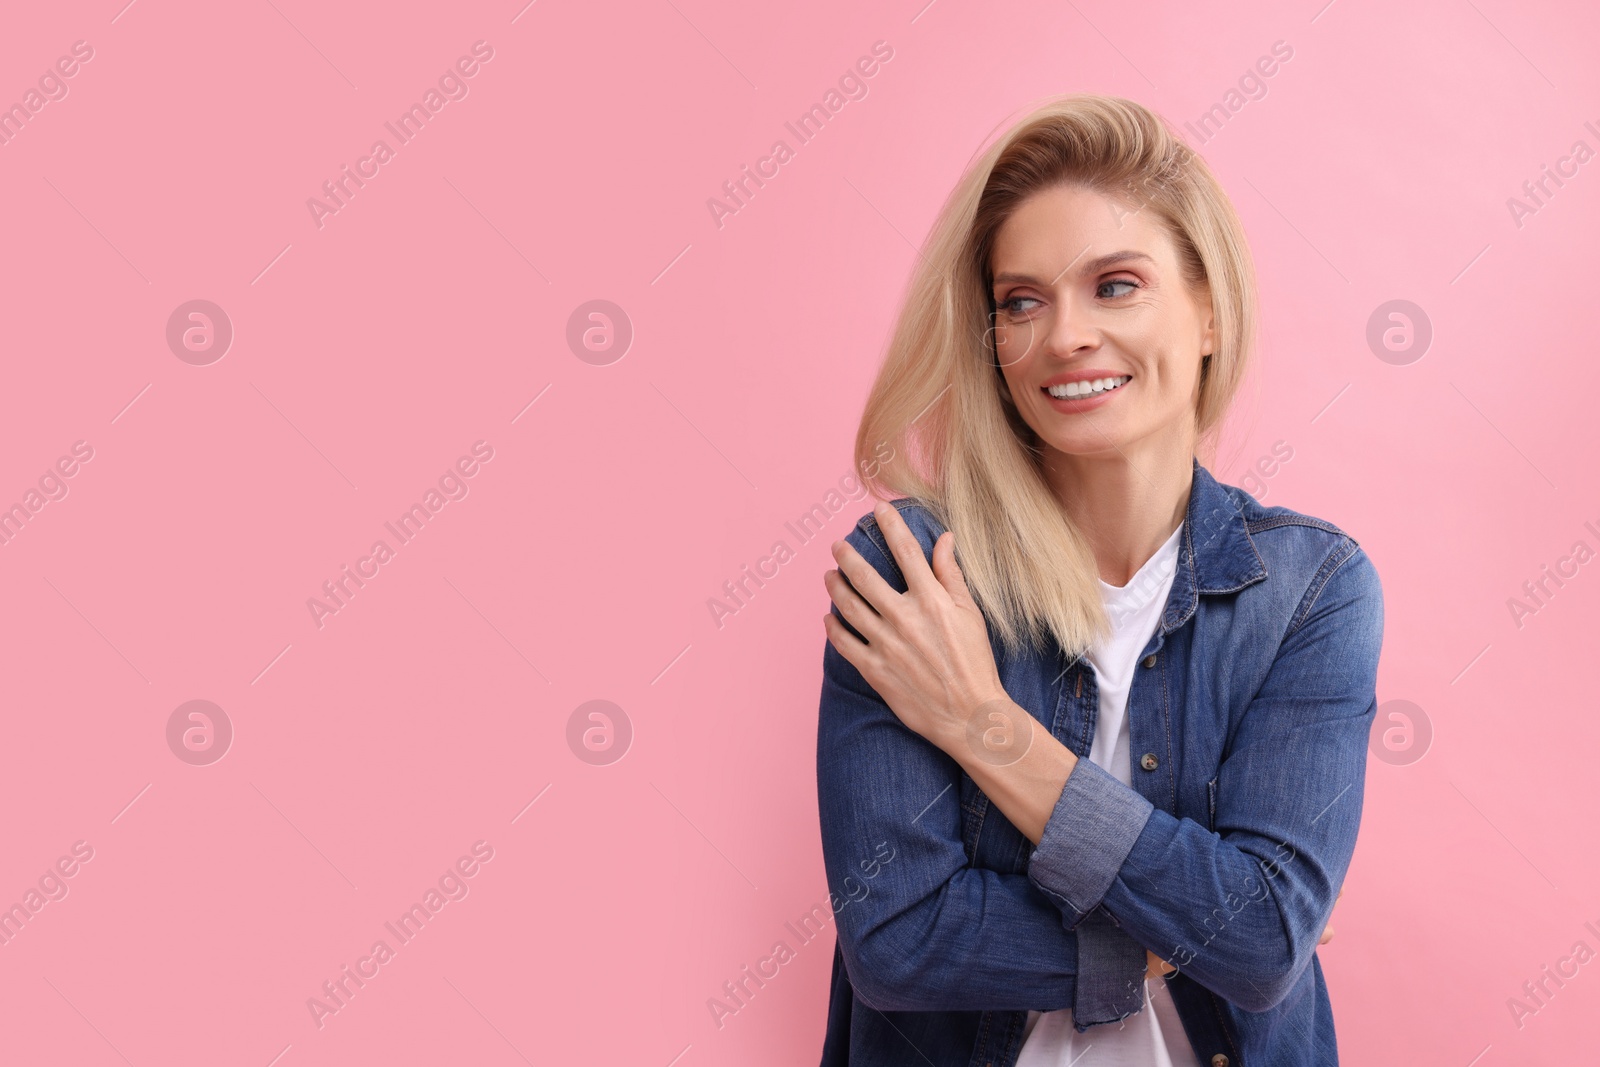 Photo of Portrait of smiling middle aged woman with blonde hair on pink background. Space for text